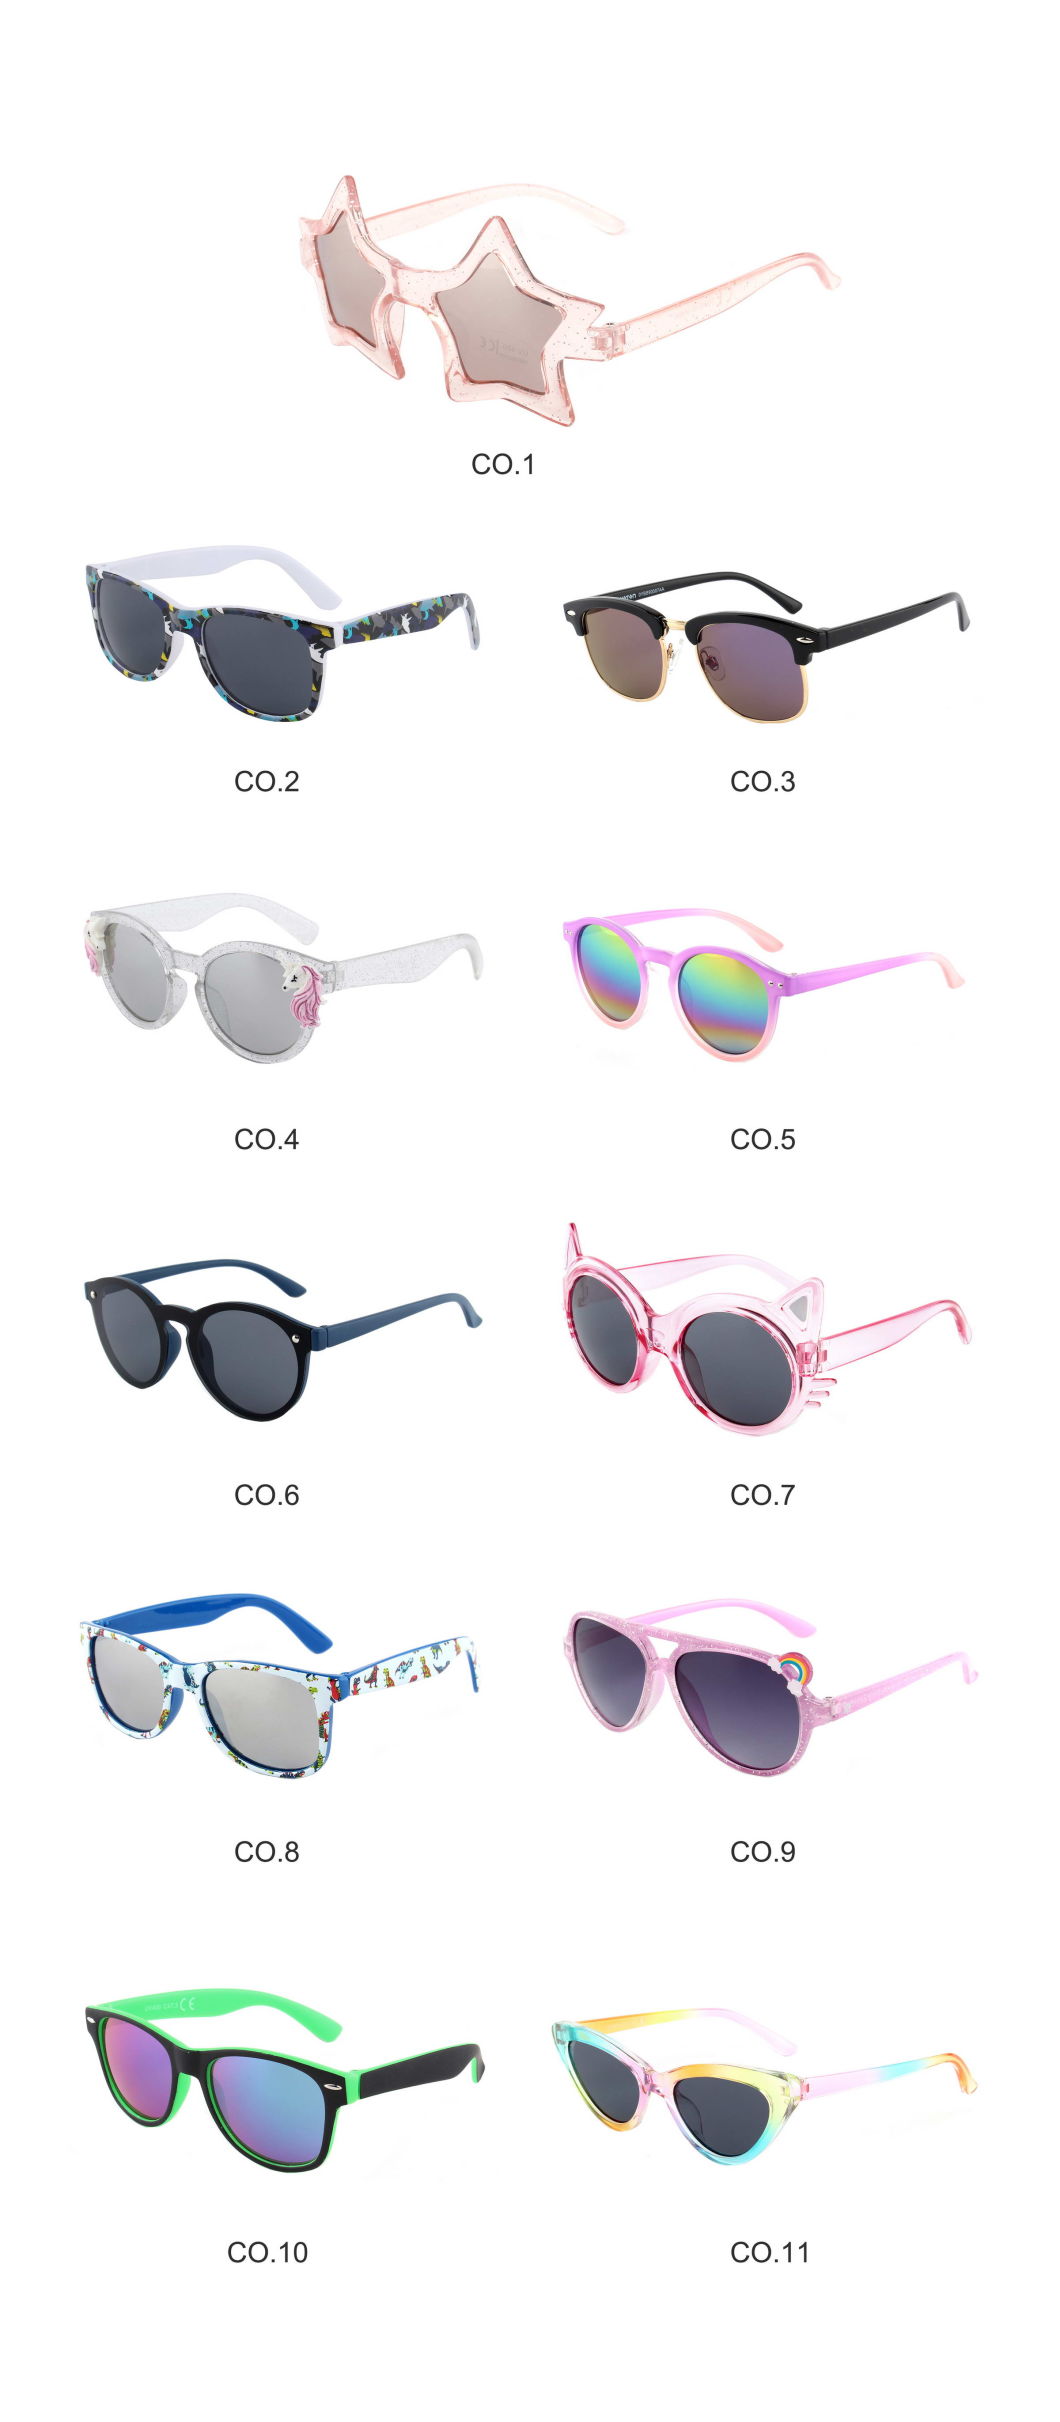 Cheap Sunglasses, Huge Discount Big Promotion Ready Stock UV400 Sunglasses Outlets for Lady, Men and Kids